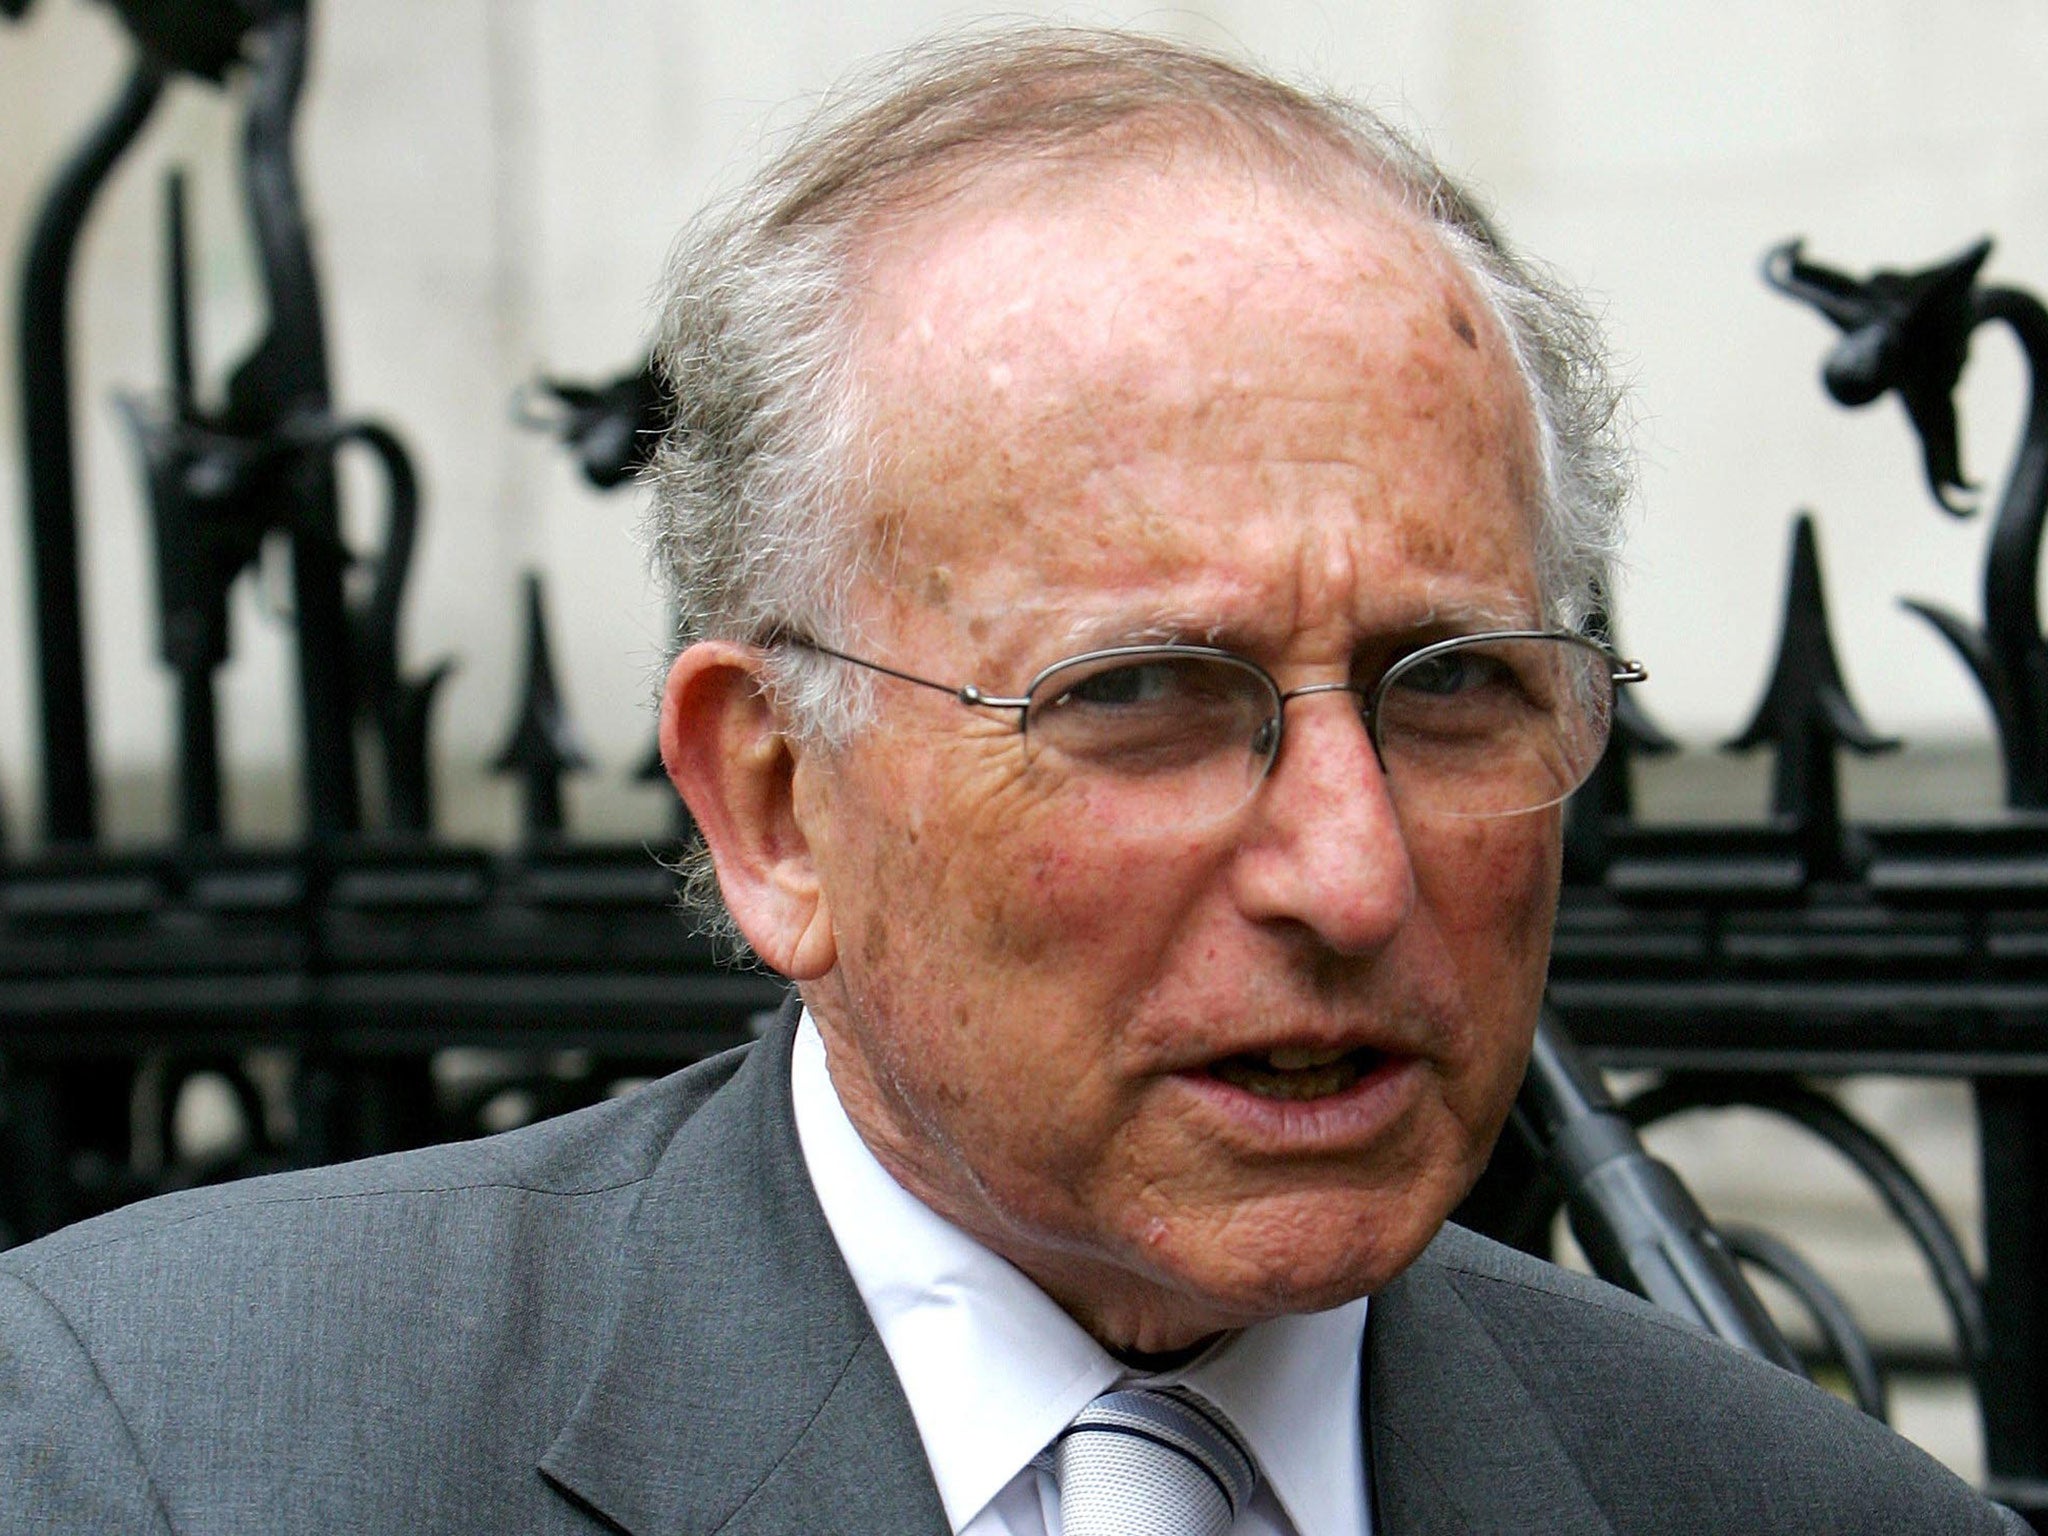 Lord Janner was chairman of the Holocaust Educational Trust and campaigned for justice for the victims of Nazism